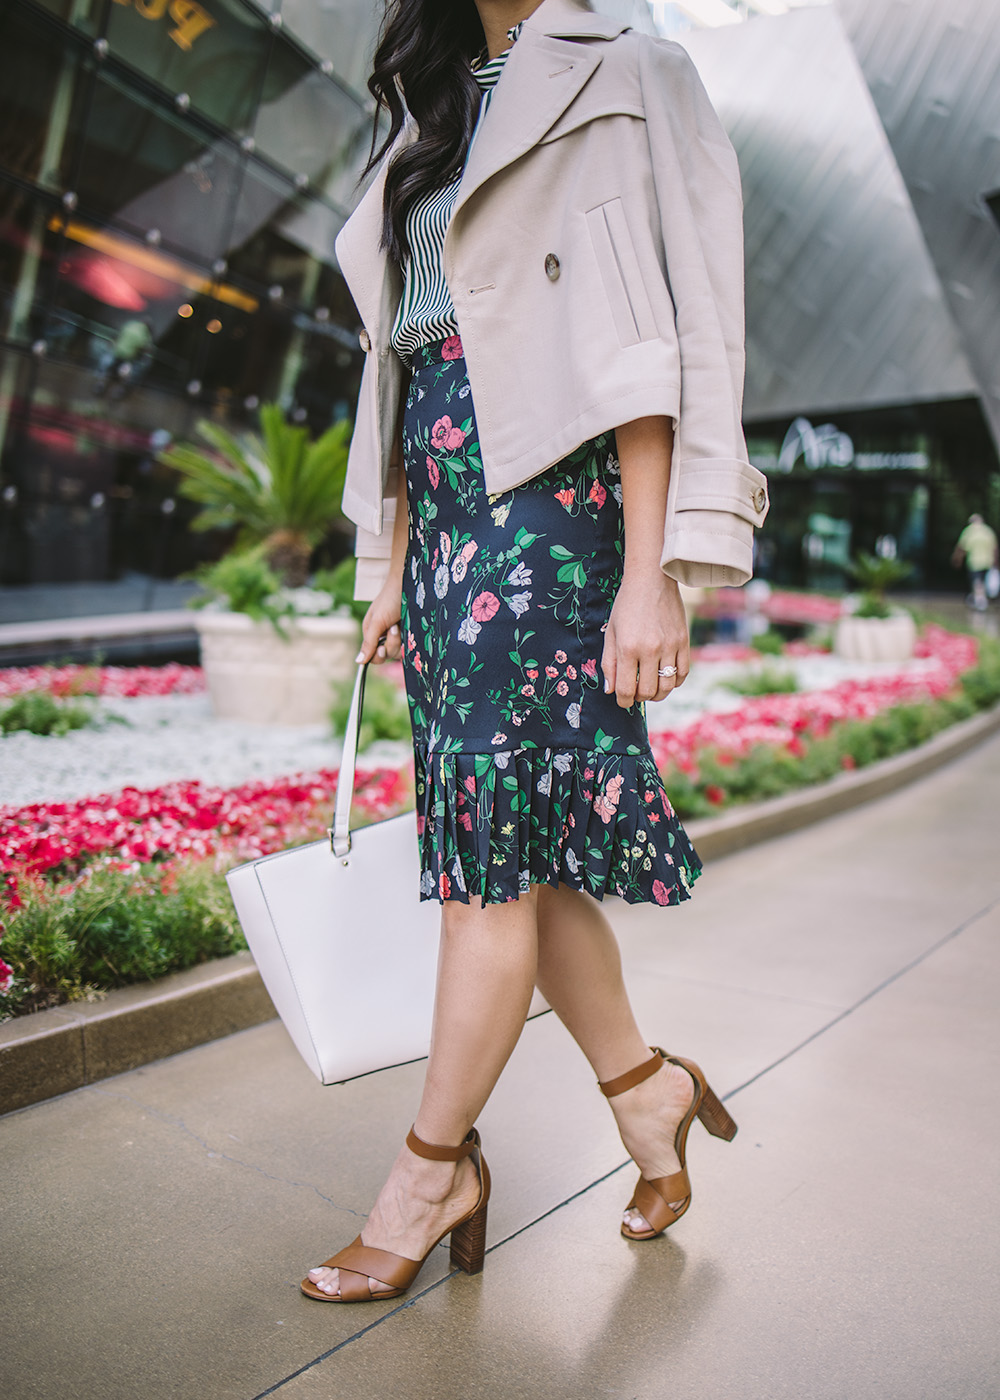 Spring Style / Striped Top & Floral Print Skirt